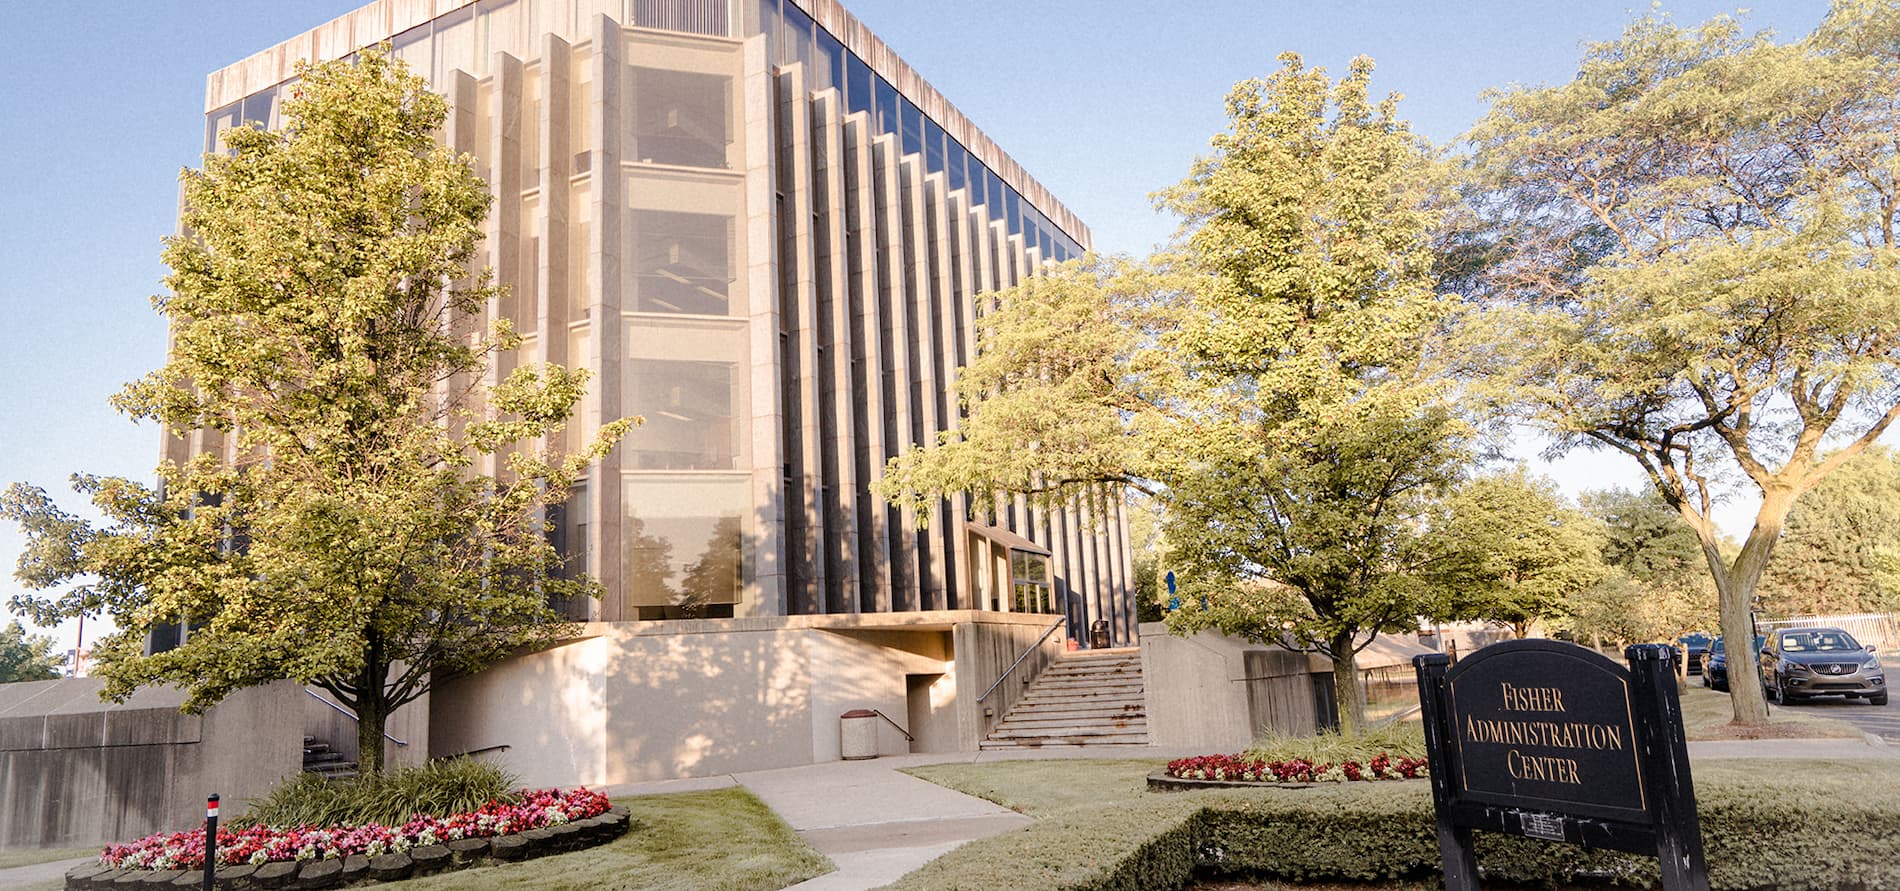 An exterior photo of the Fisher Administration Center, with flowers and trees seen in front of it on a sunny day.